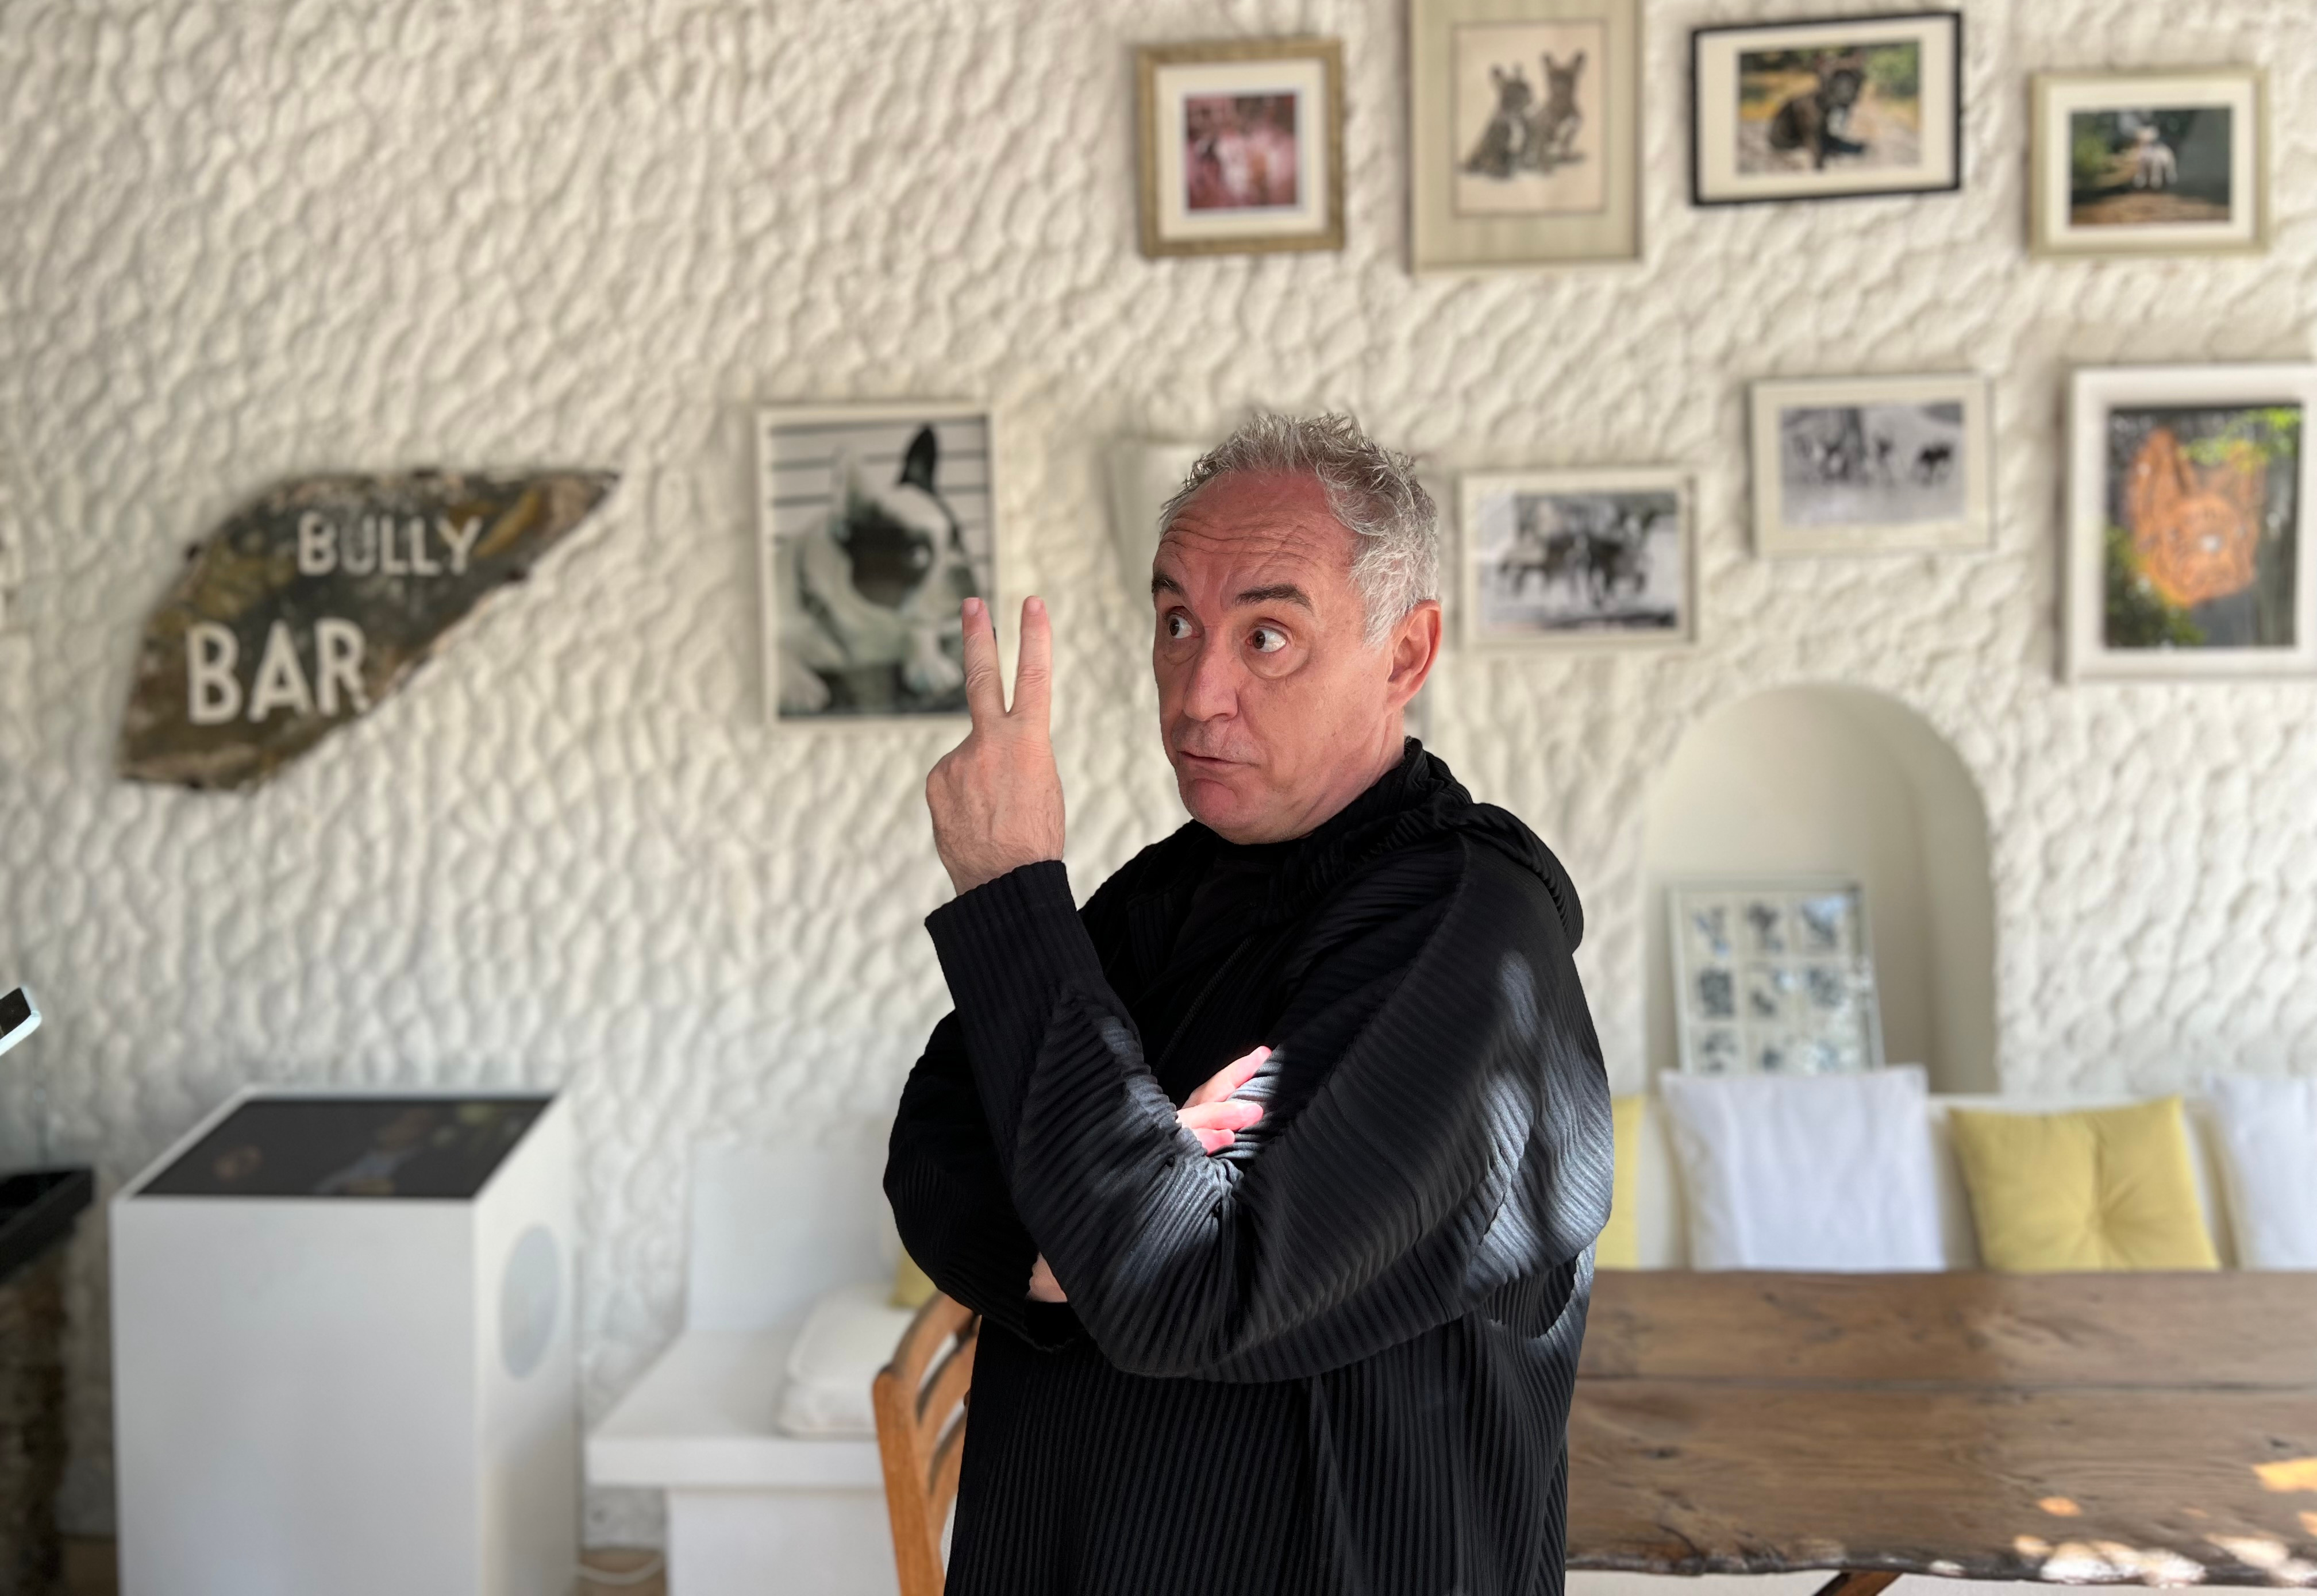 Chef Ferran Adrià at ElBulli1846 museum in front of French bulldogs pictures hanging on the wall